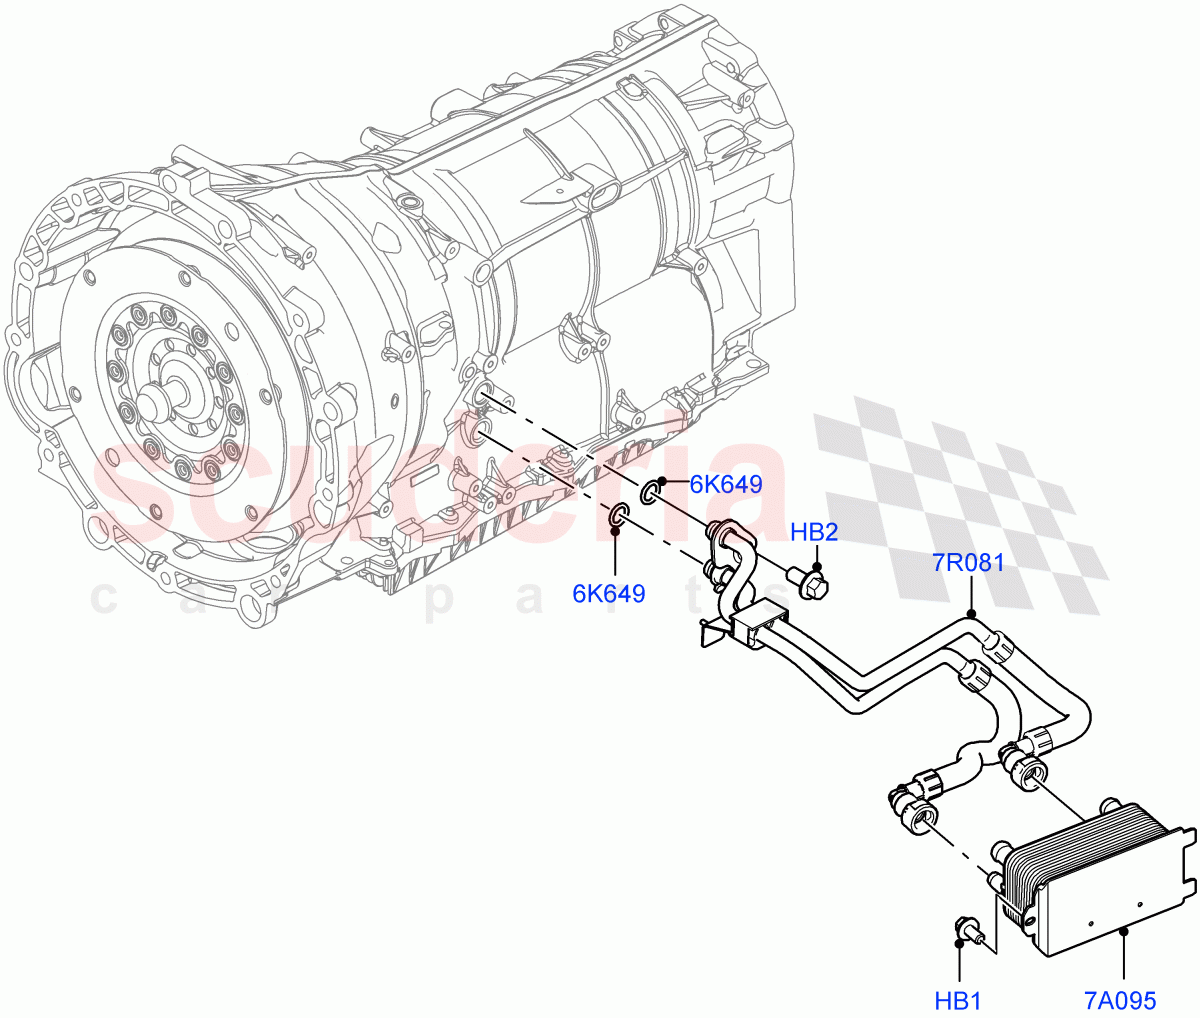 Transmission Cooling Systems(Nitra Plant Build)(3.0L AJ20P6 Petrol High,8 Speed Auto Trans ZF 8HP76,3.0L AJ20D6 Diesel High) of Land Rover Land Rover Discovery 5 (2017+) [2.0 Turbo Petrol AJ200P]